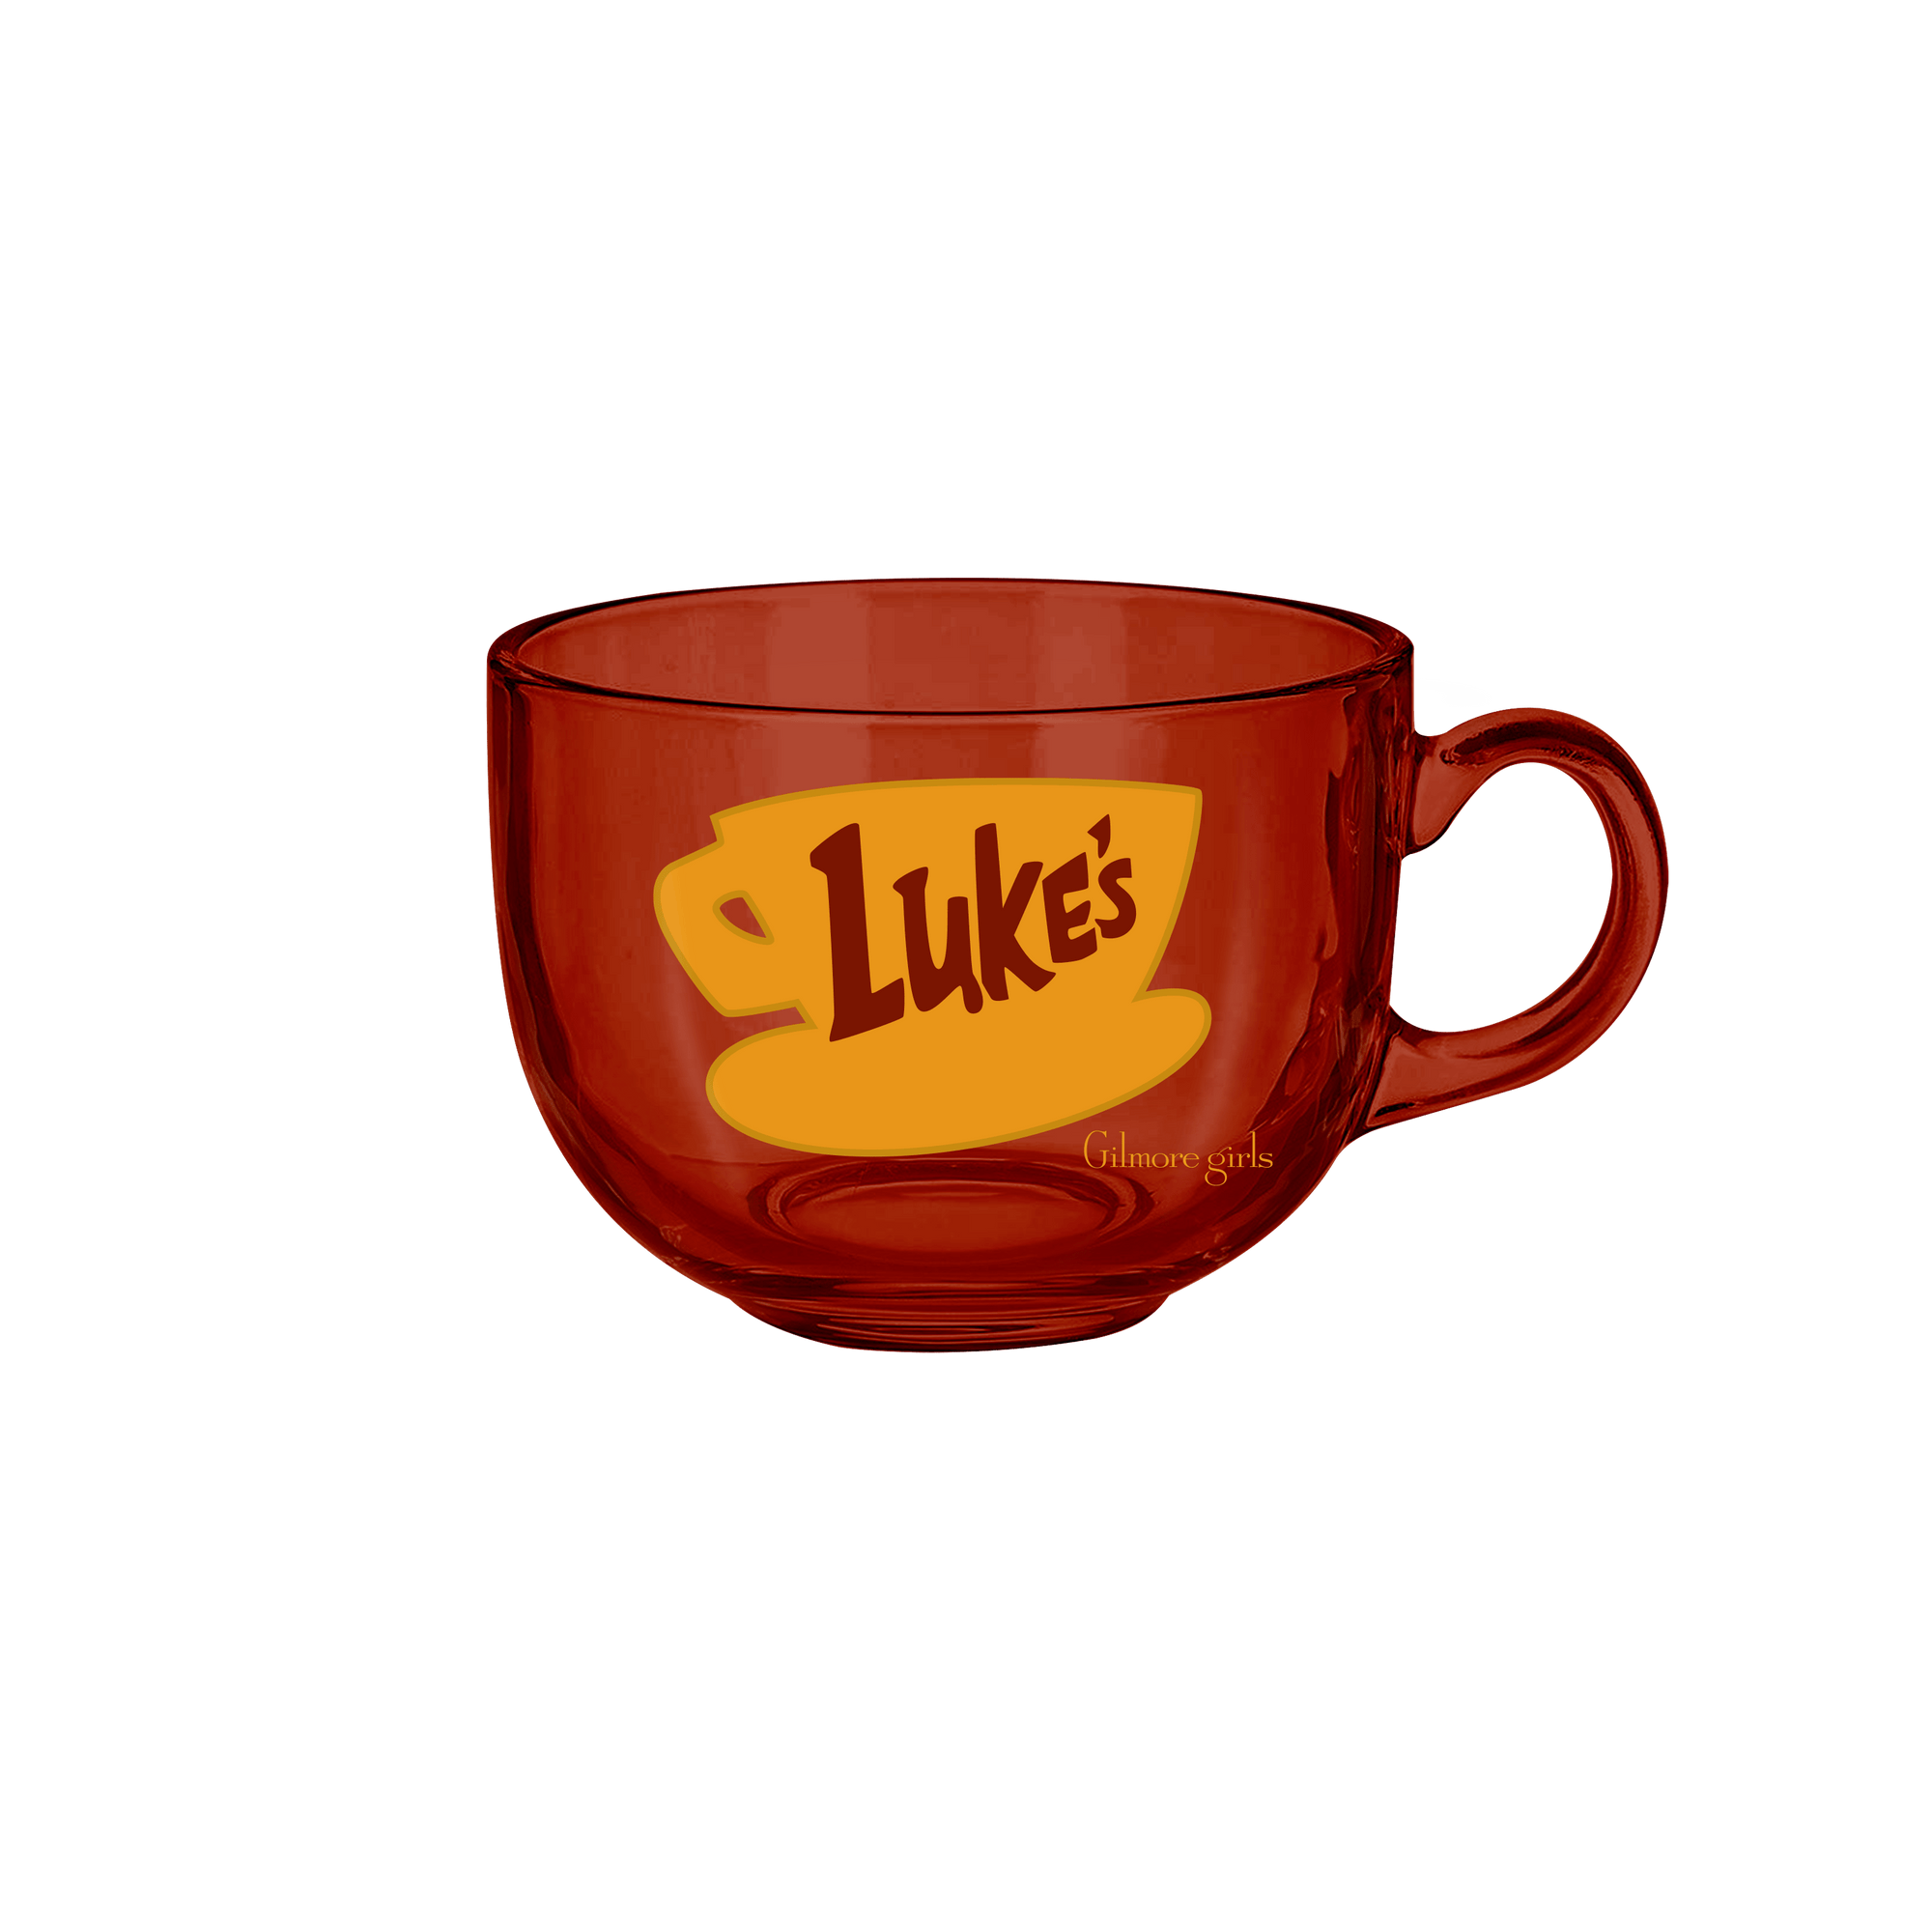 Coffee at Luke's ✨ some comfort show straw charms for all my fellow Gilmore  girls fans . . Coming soon! Follow for drop day updates 💕…